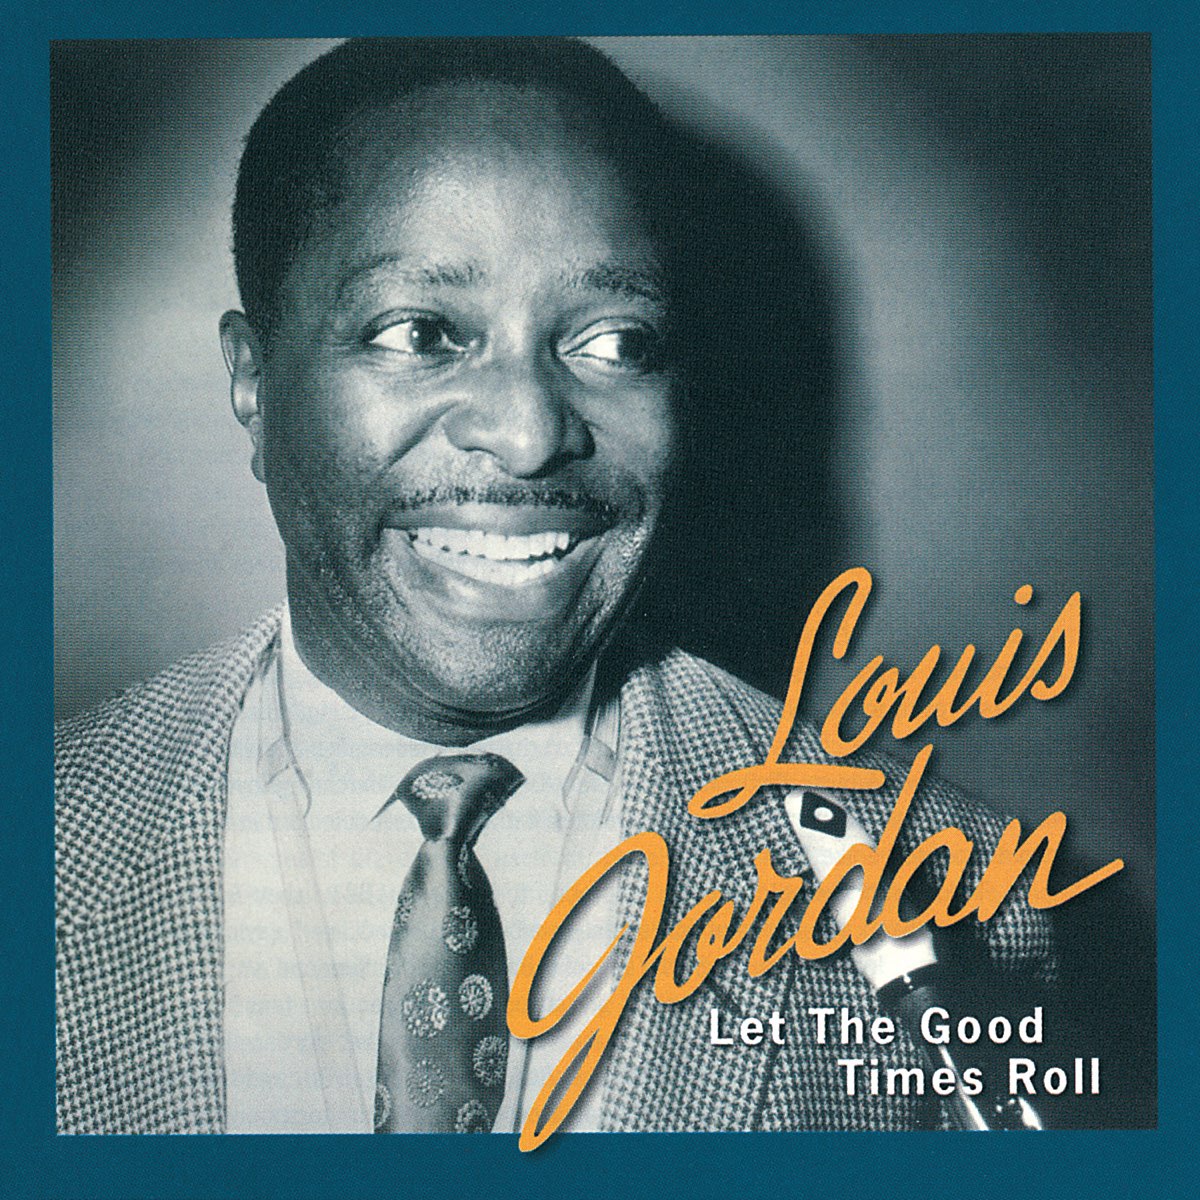 Let the Good Times Roll: The Anthology 1938 - 1953 - Album by Louis Jordan  - Apple Music